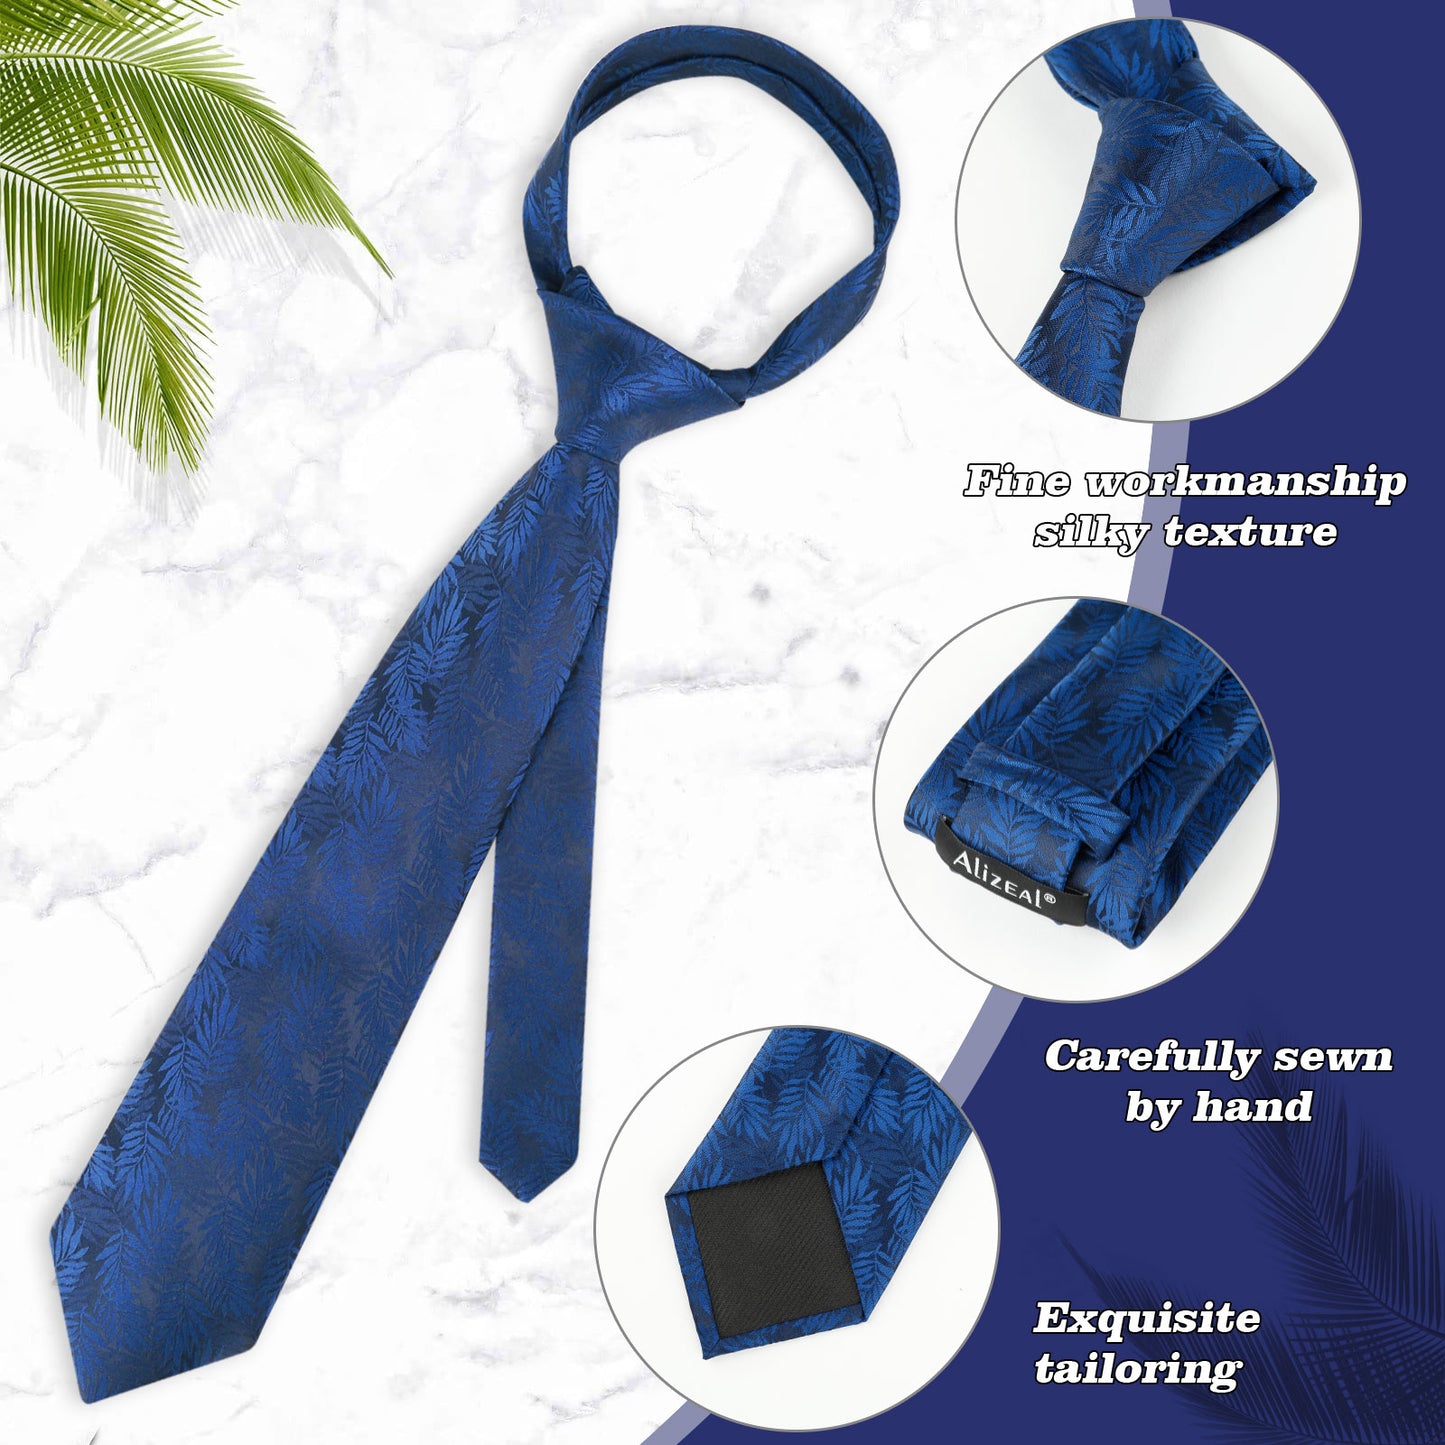 Men‘s Floral Pattern Tie with Pocket Square 3.15inches Self-tied Set, #141